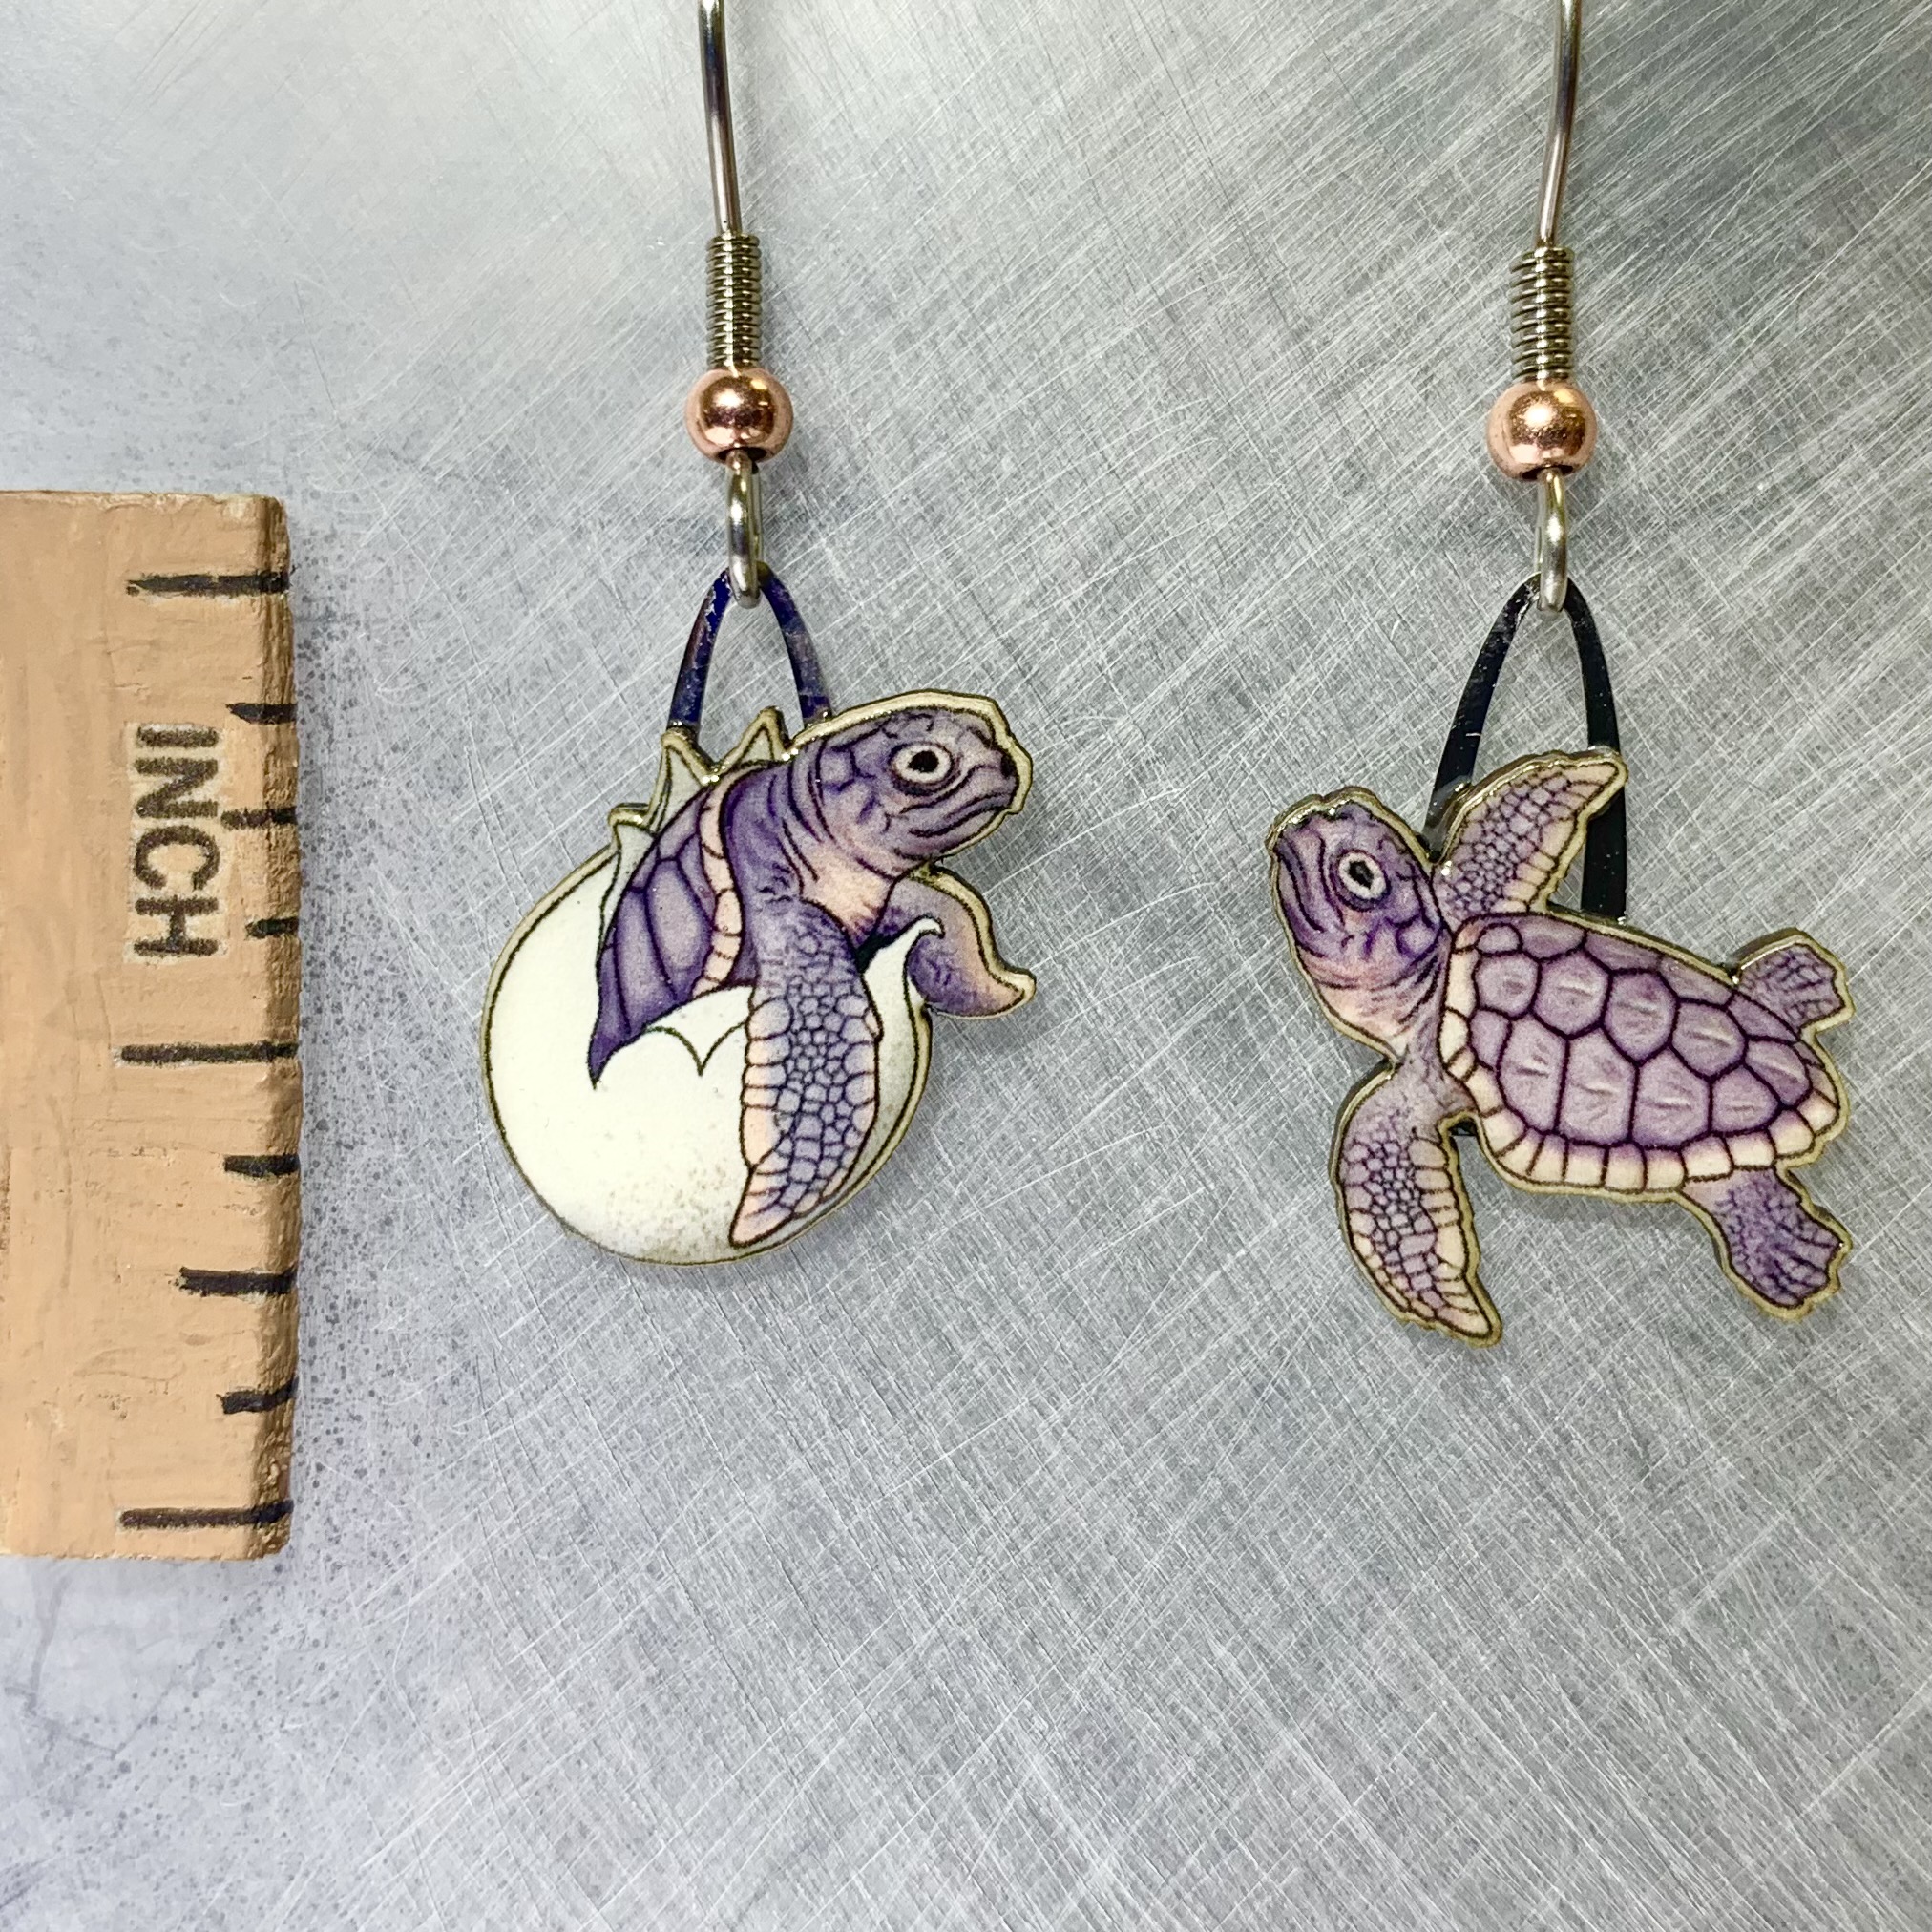 Picture shown is of 1 inch tall pair of earrings of the marine animal the Loggerhead Hatchling.